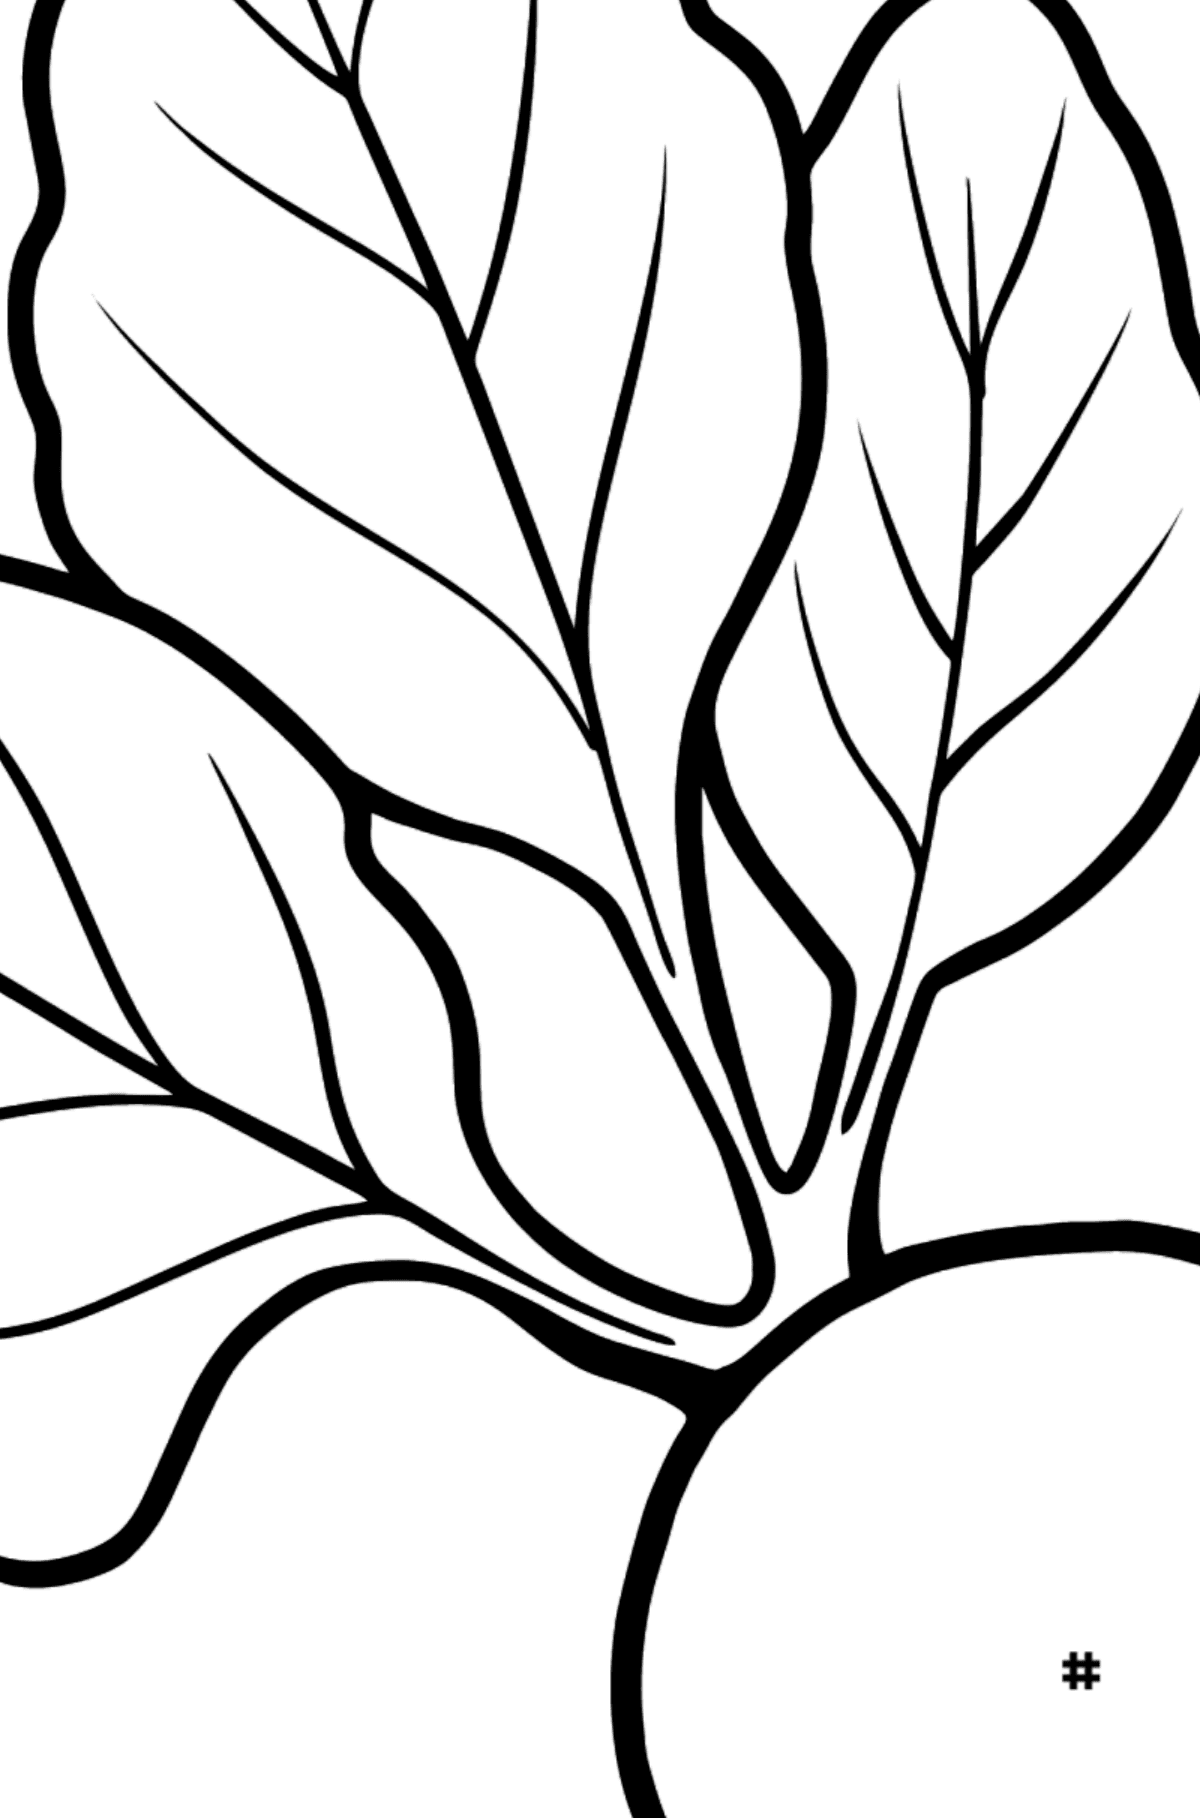 Beet coloring page - Coloring by Symbols for Kids